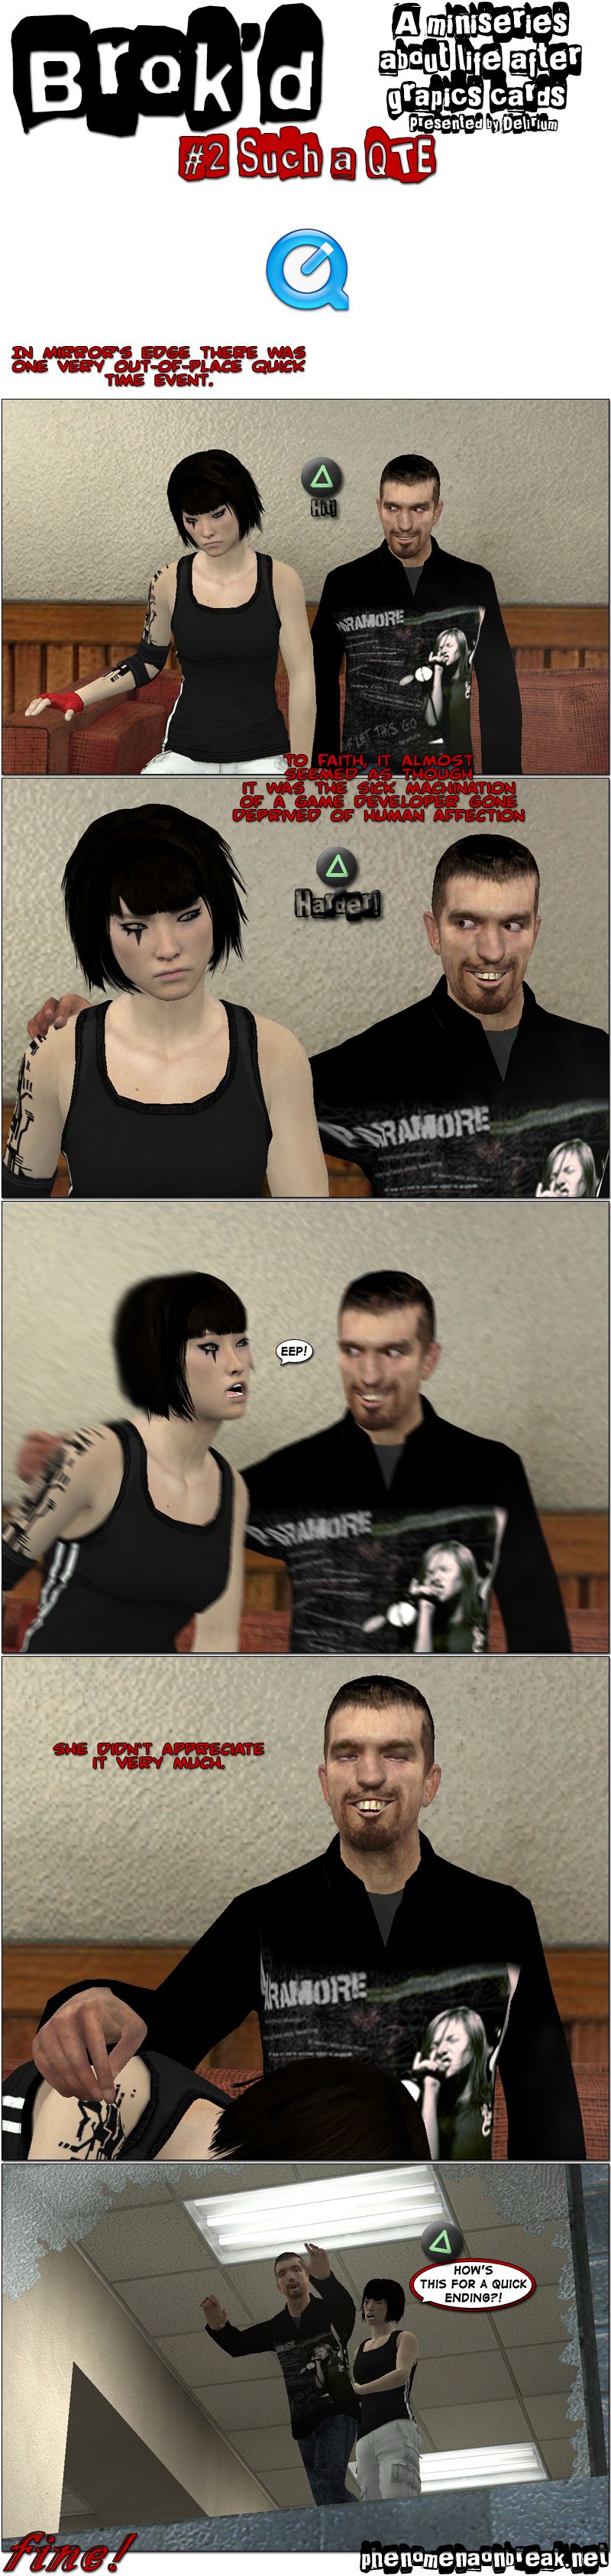 A miniseries about life after graphics cards presented by Delirium. A note says that in Mirror’s Edge there was one very out-of-place quick time event. We see Faith, the protagonist of Mirror’s Edge, sitting in a couch next to Nemi, who has a wicked smile. The icon for the PlayStation’s triangle button appears onscreen with the message hit. A note says that, to Faith, it almost seemed as though it was the sick machination of a game developer gone deprived of human affection. Nemi puts his hand on Faith’s shoulder as she looks at him and the button prompt says harder. Suddenly, Nemi pulls Faith towards his crotch, then grins in satisfaction as she lies for a moment with her head in his lap. A note says she didn’t appreciate it very much, then Faith throws Nemi out of a window screaming how’s this for a quick ending. The end.